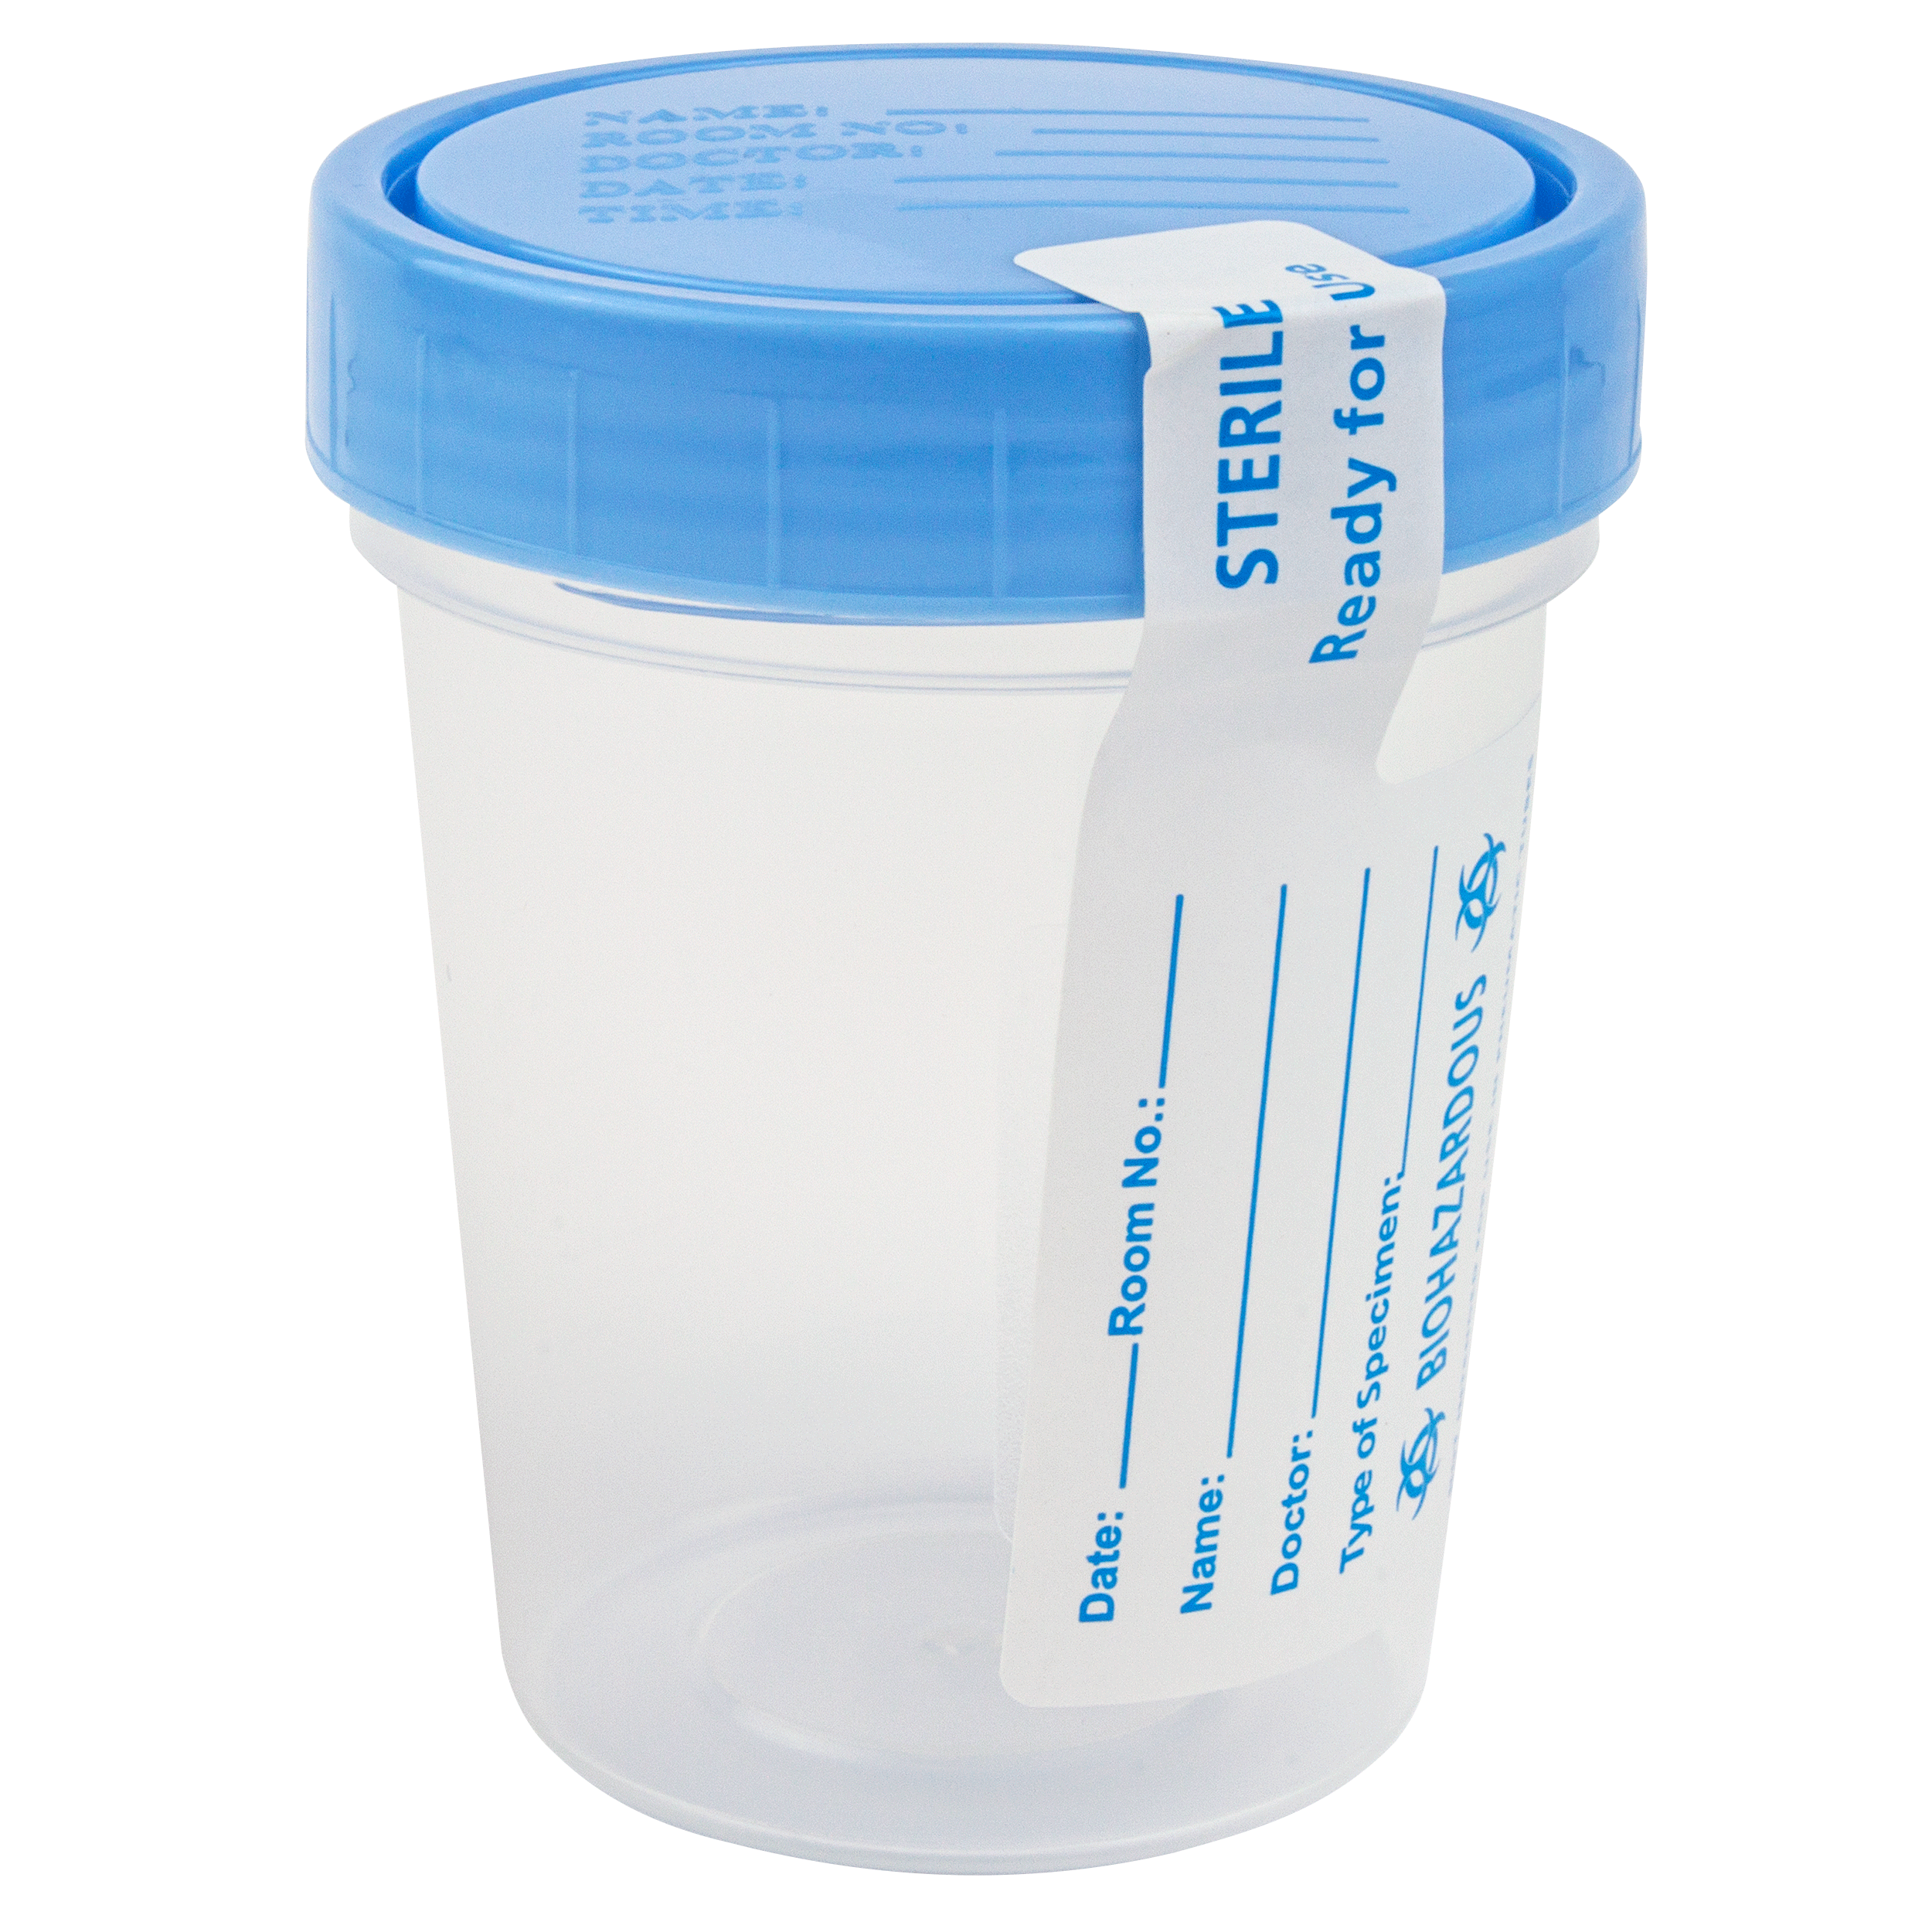 Specimen Containers, 4 oz. - Sterile, individually wrapped